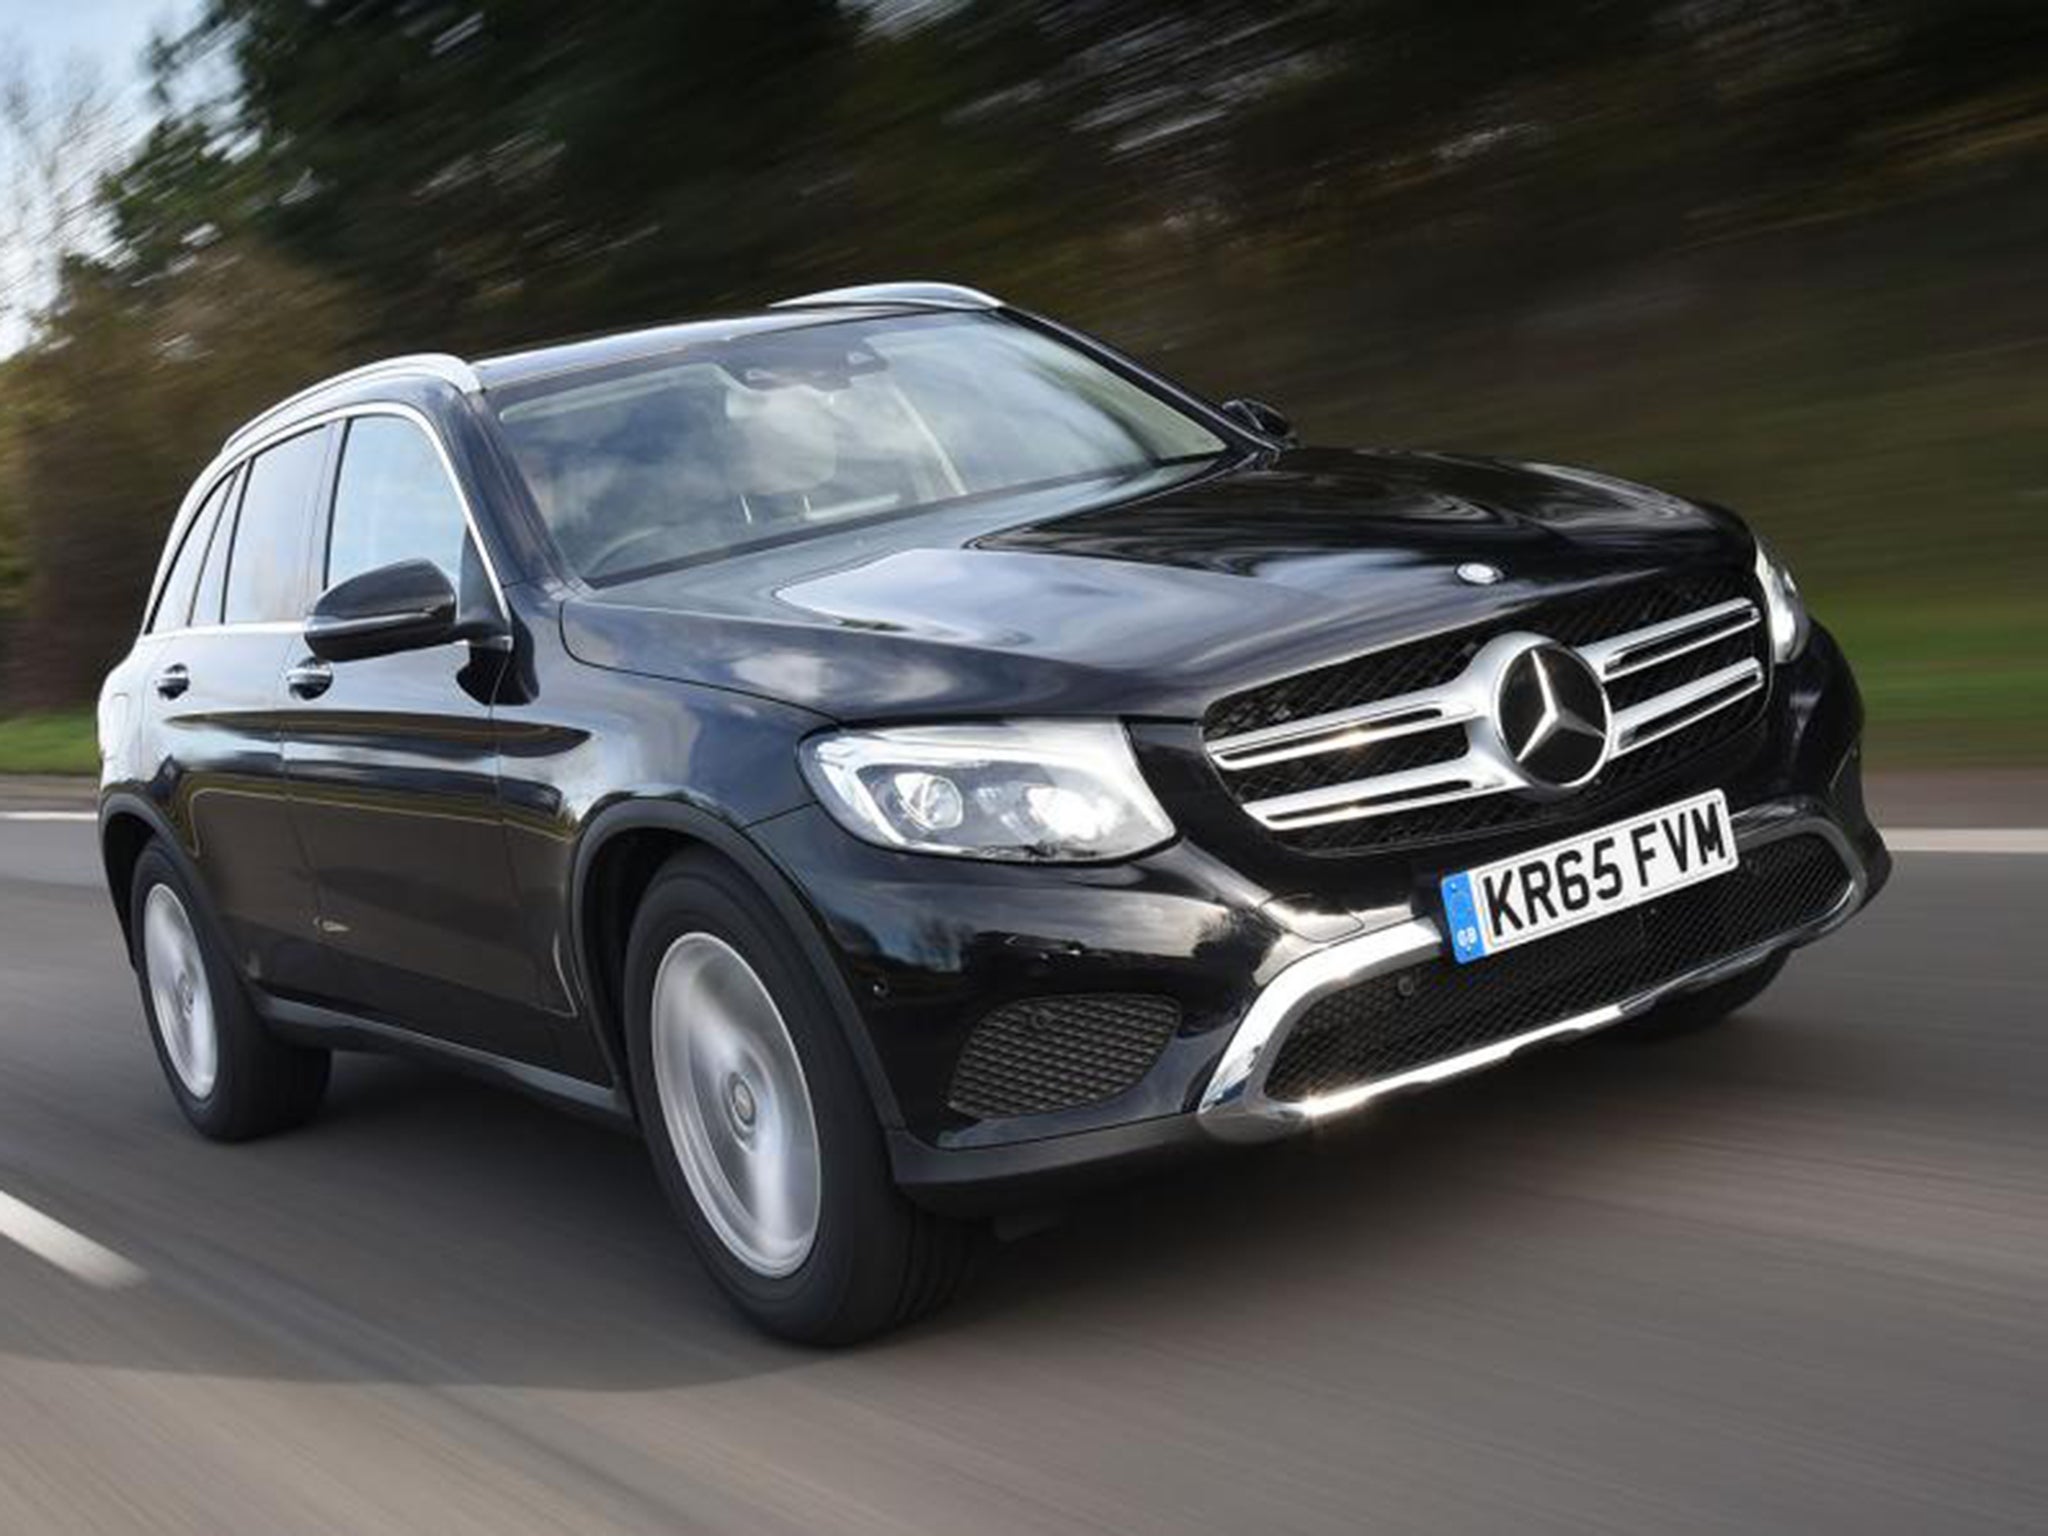 The Mercedes GLC 220 d has the same engine as the 250 d version